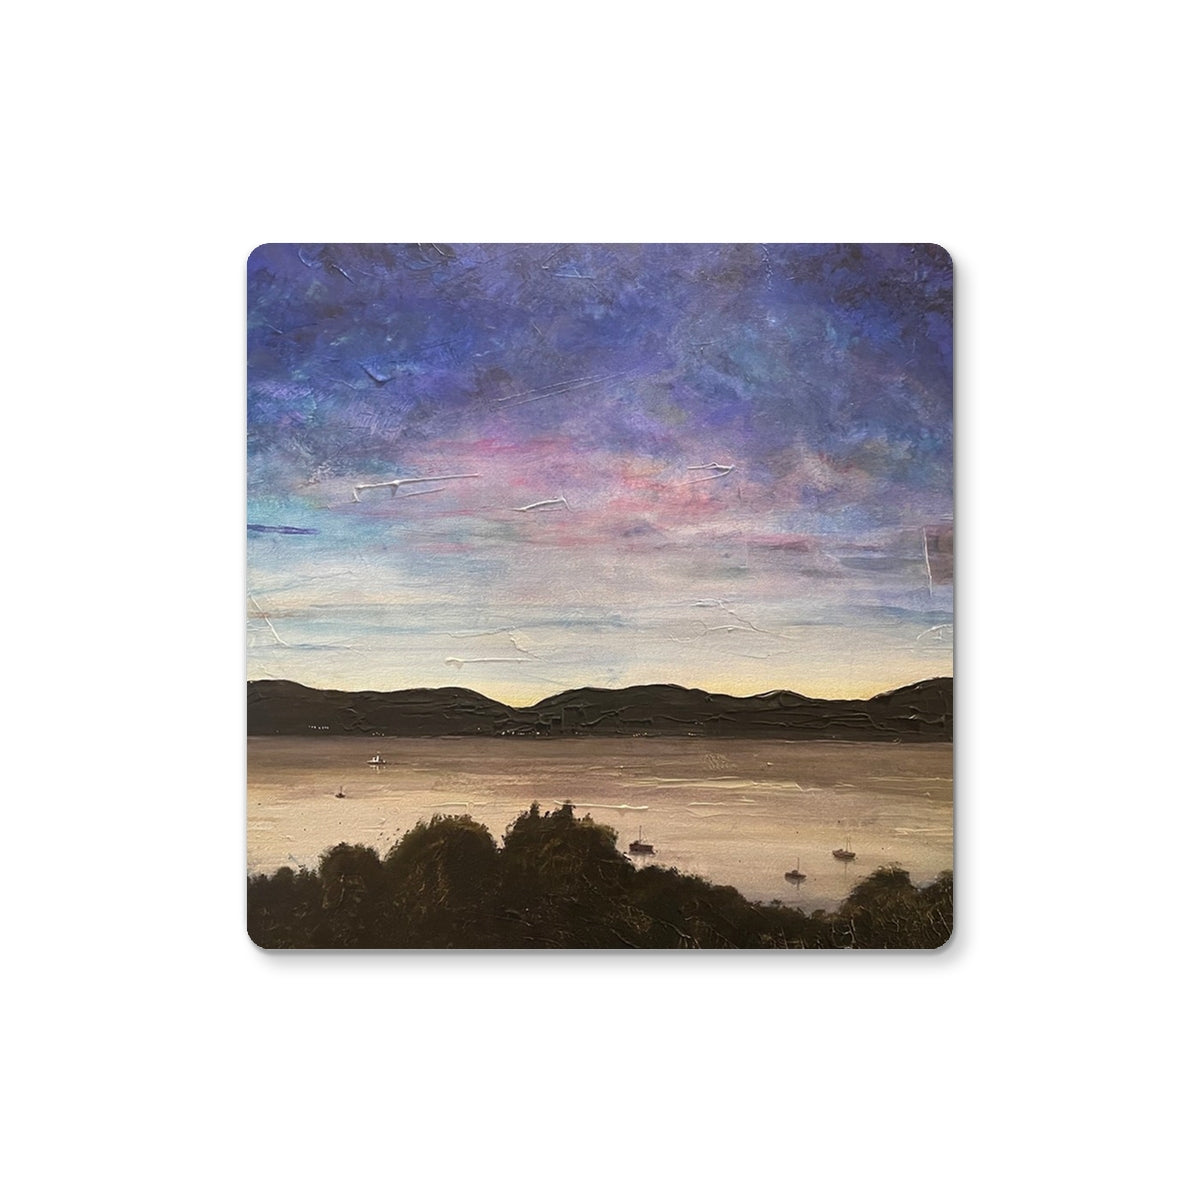 River Clyde Twilight Art Gifts Coaster-Coasters-River Clyde Art Gallery-2 Coasters-Paintings, Prints, Homeware, Art Gifts From Scotland By Scottish Artist Kevin Hunter